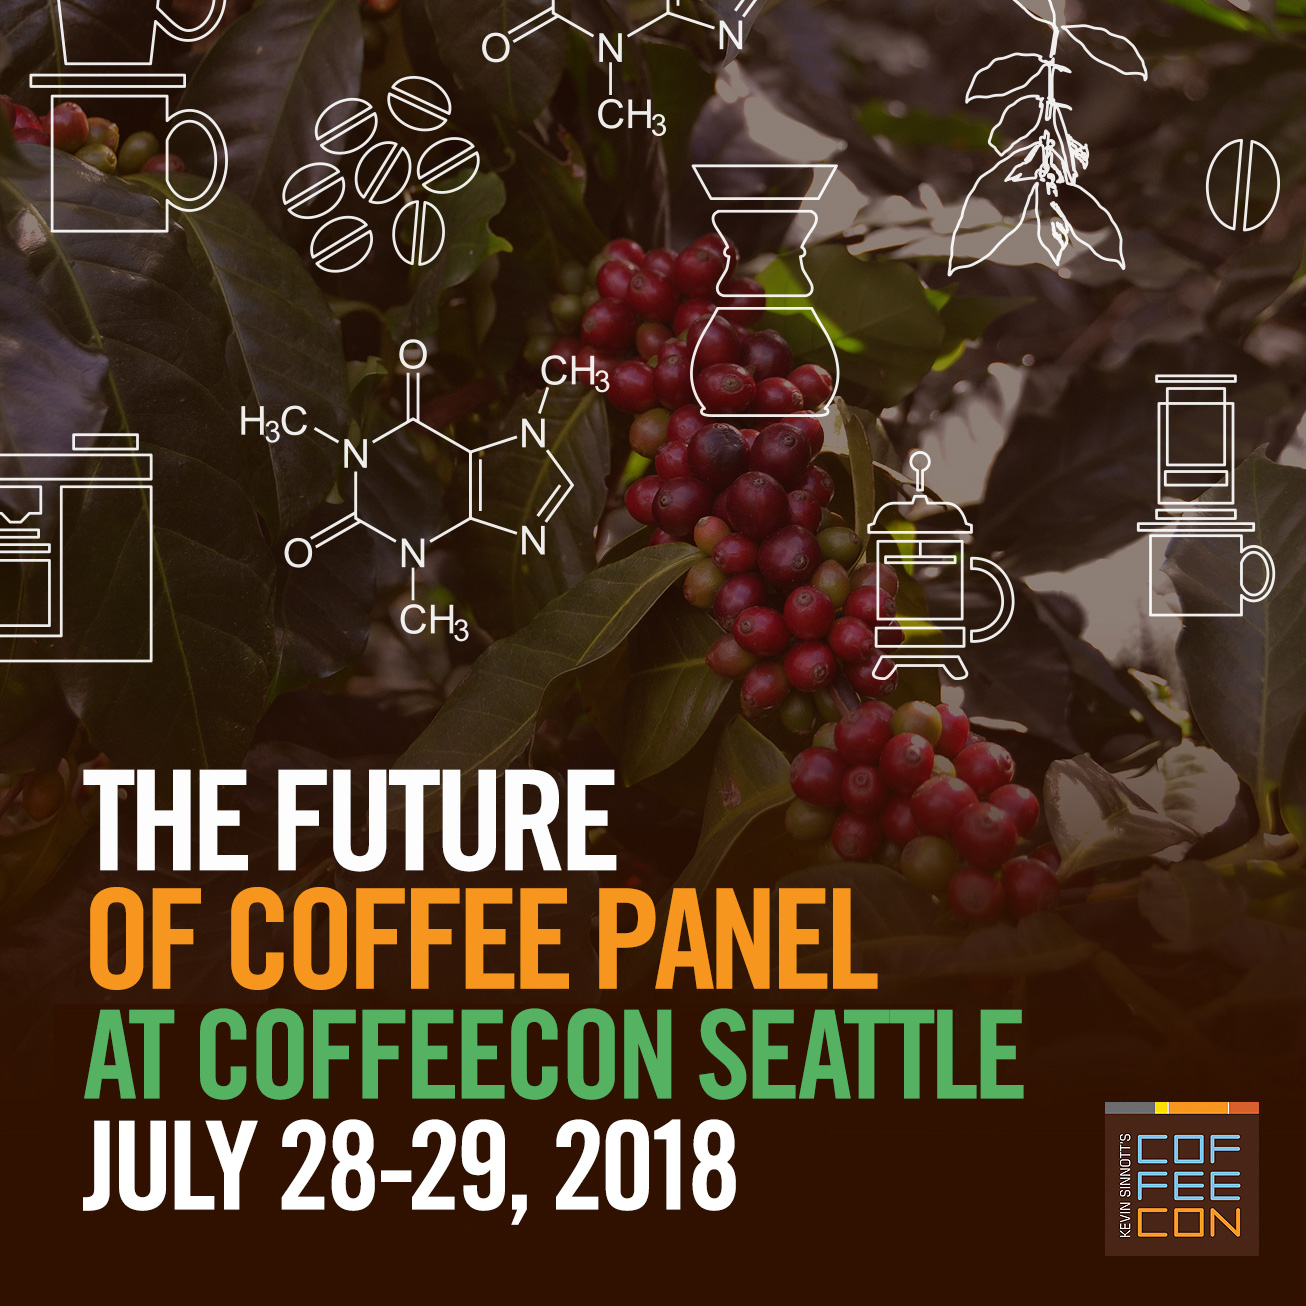 The Future of Coffee Panel